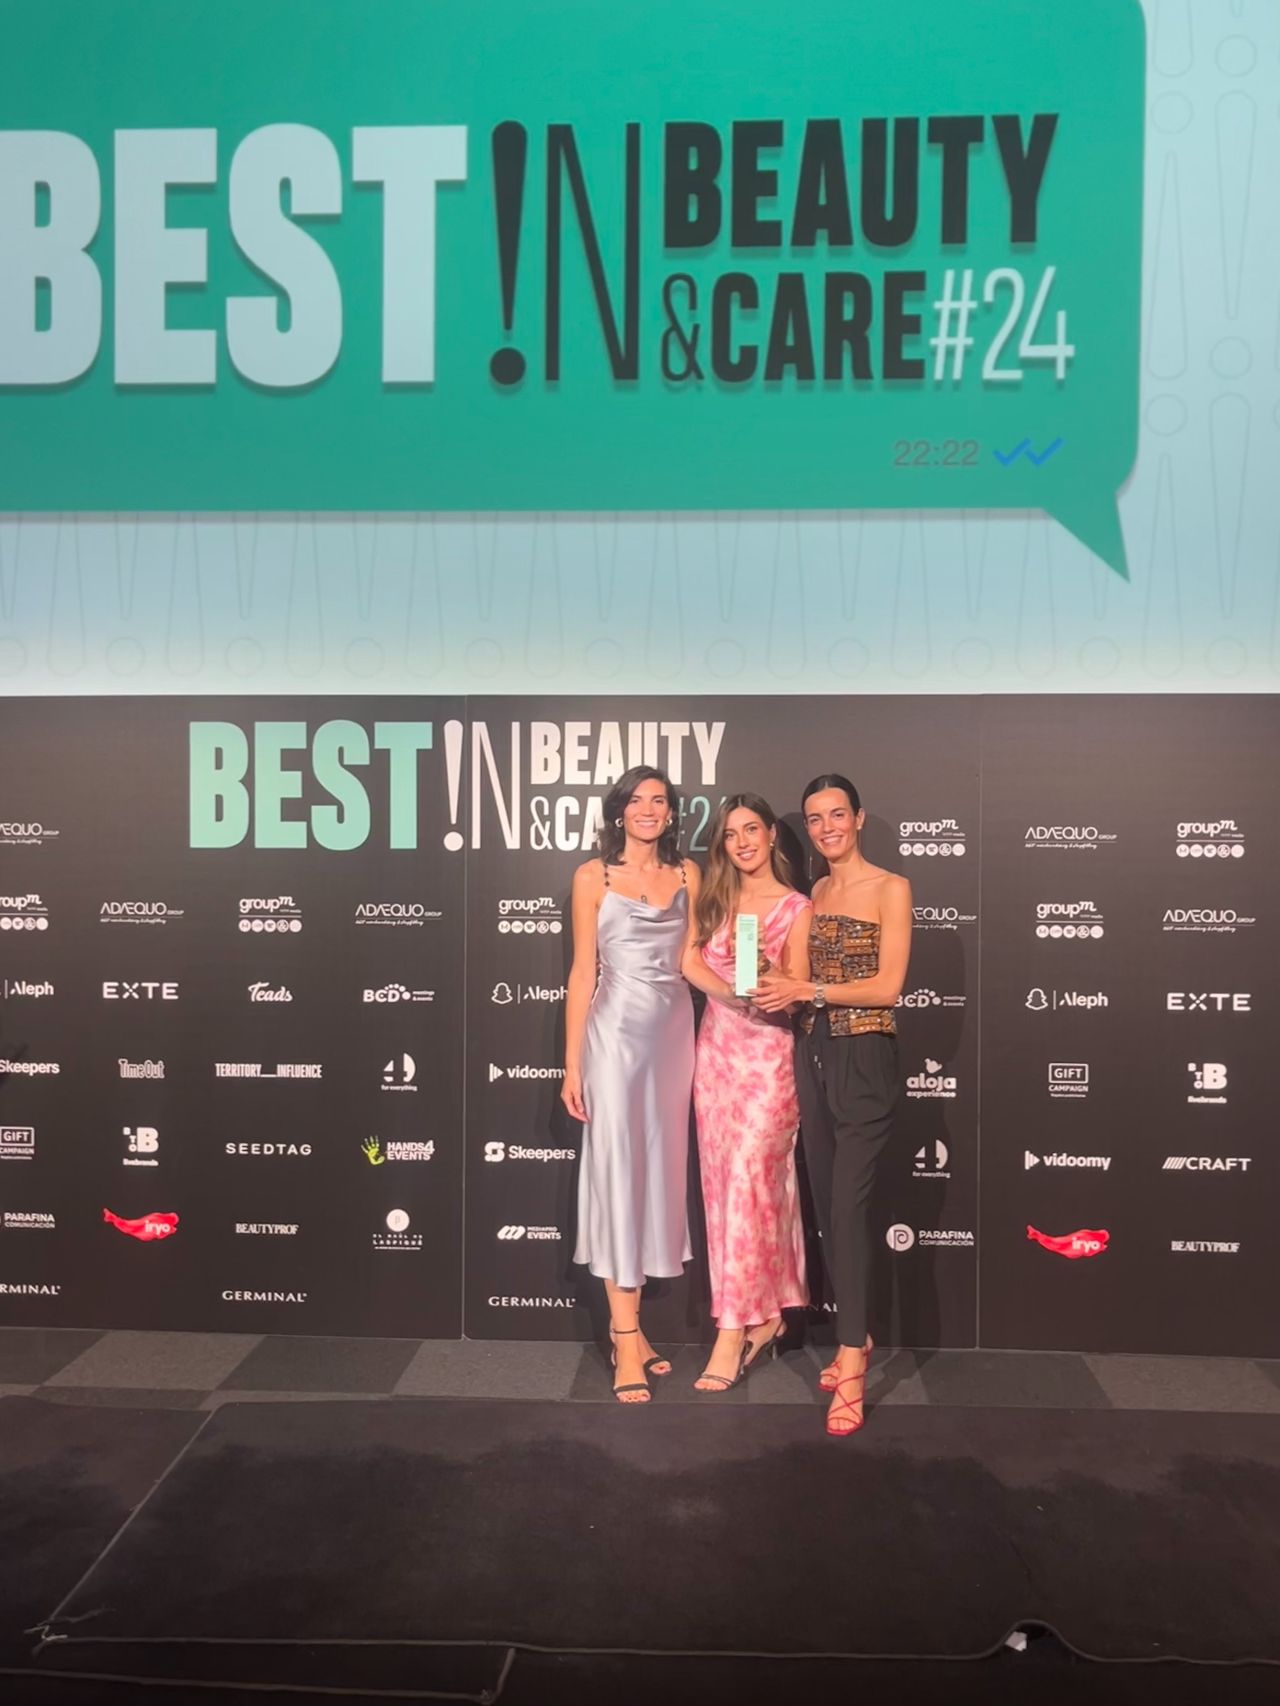 Awarded with Silver in the ‘Best PR’ category at the Best !N Beauty & Care 2024 Awards.